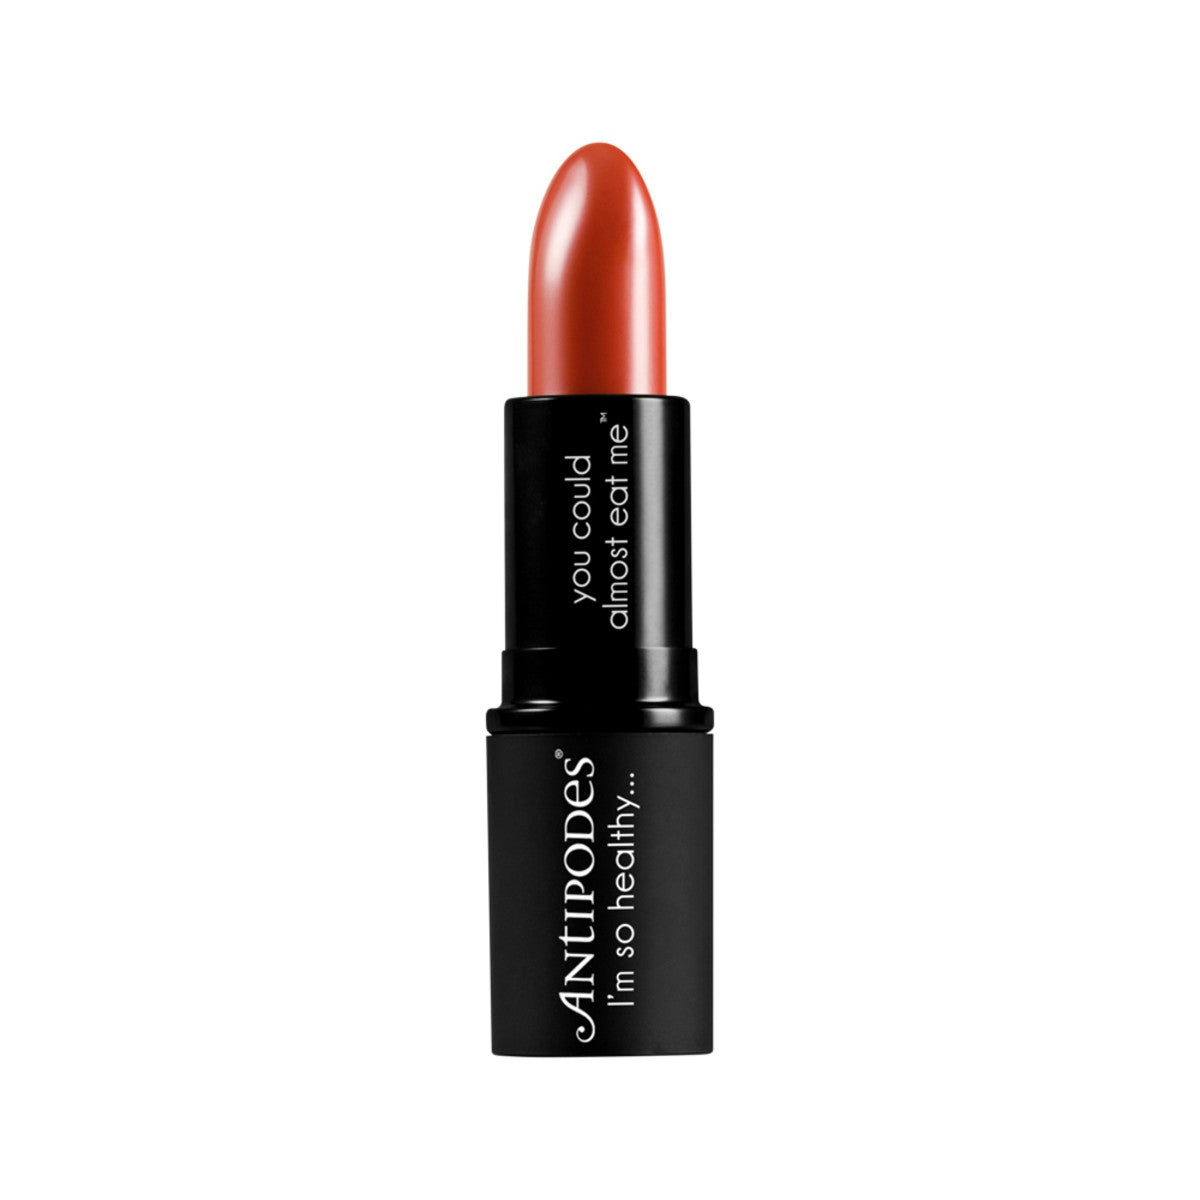 image of Antipodes Moisture-Boost Natural Lipstick Boom Rock Bronze on white background 